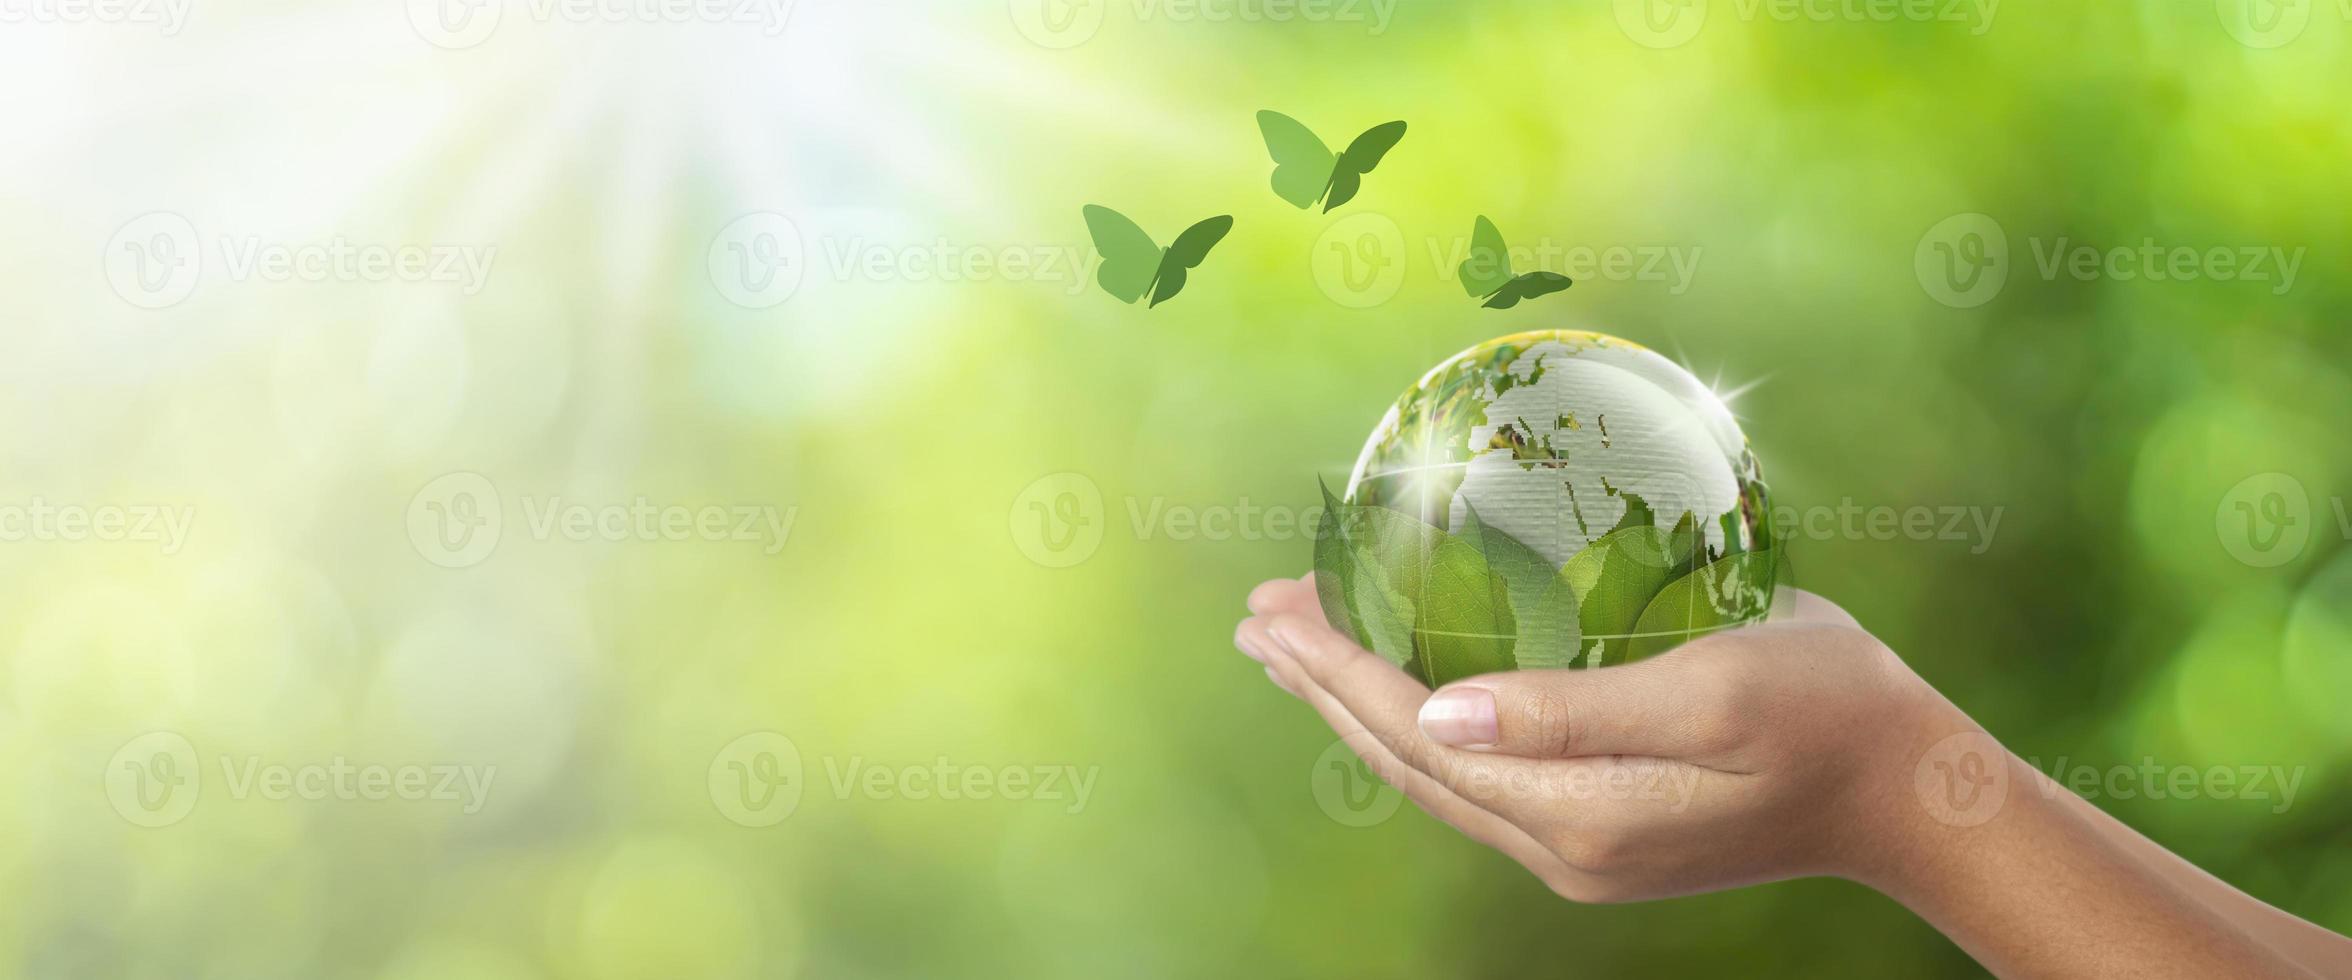 environmental conservation earth concept, woman holding globe under leaf and butterfly flying nearby, earth in woman's hand green bokeh background and white light photo